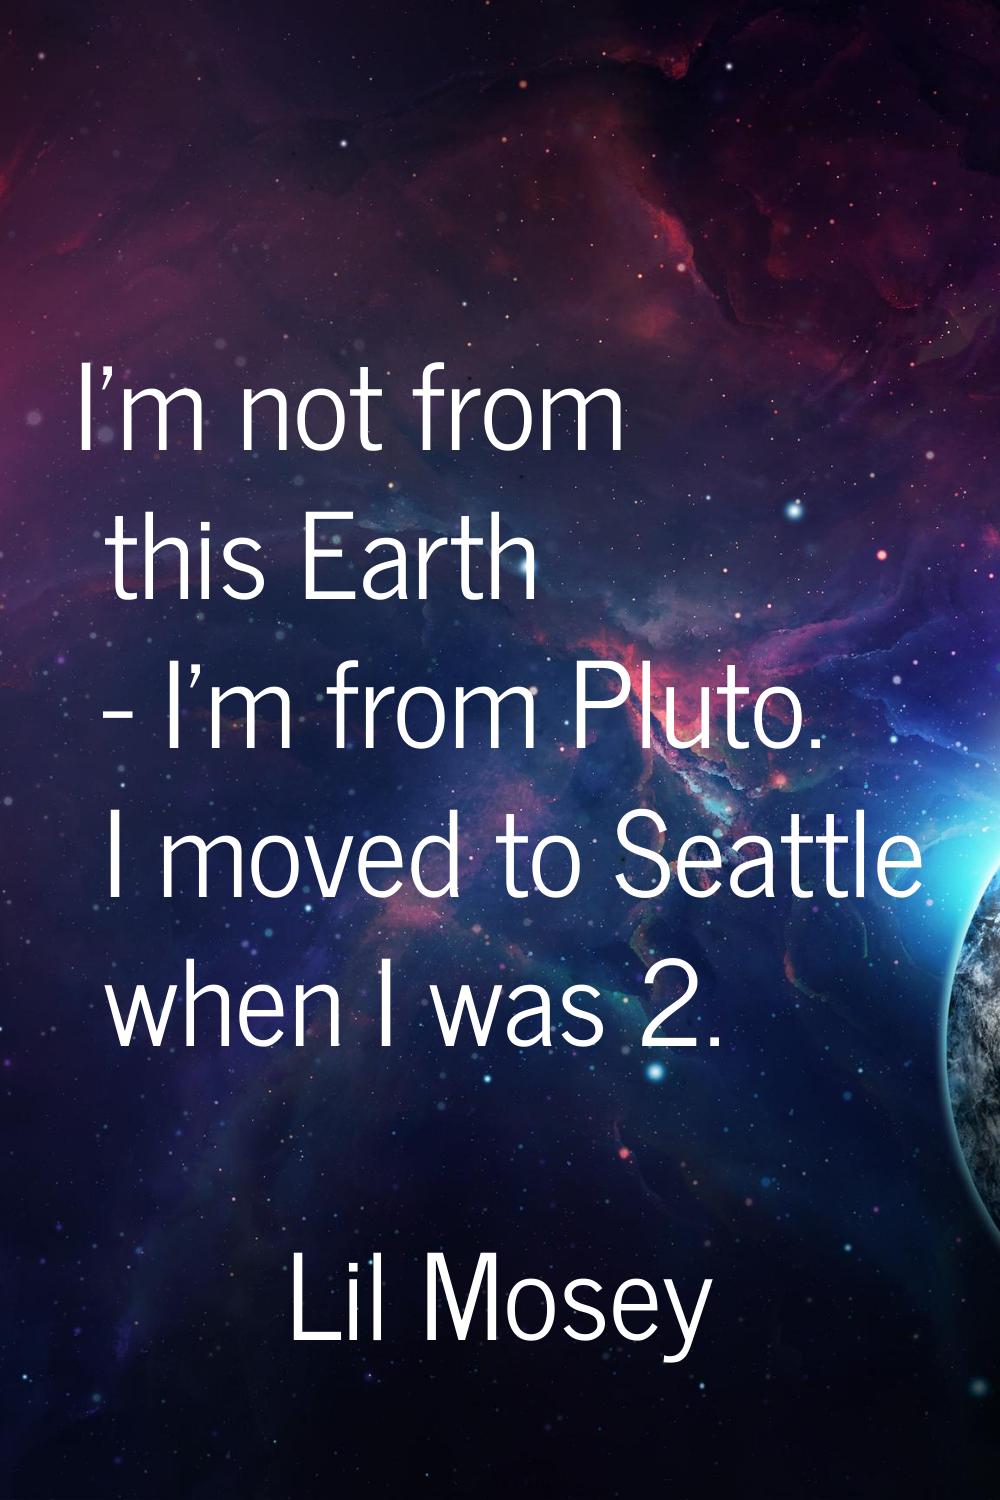 I'm not from this Earth - I'm from Pluto. I moved to Seattle when I was 2.